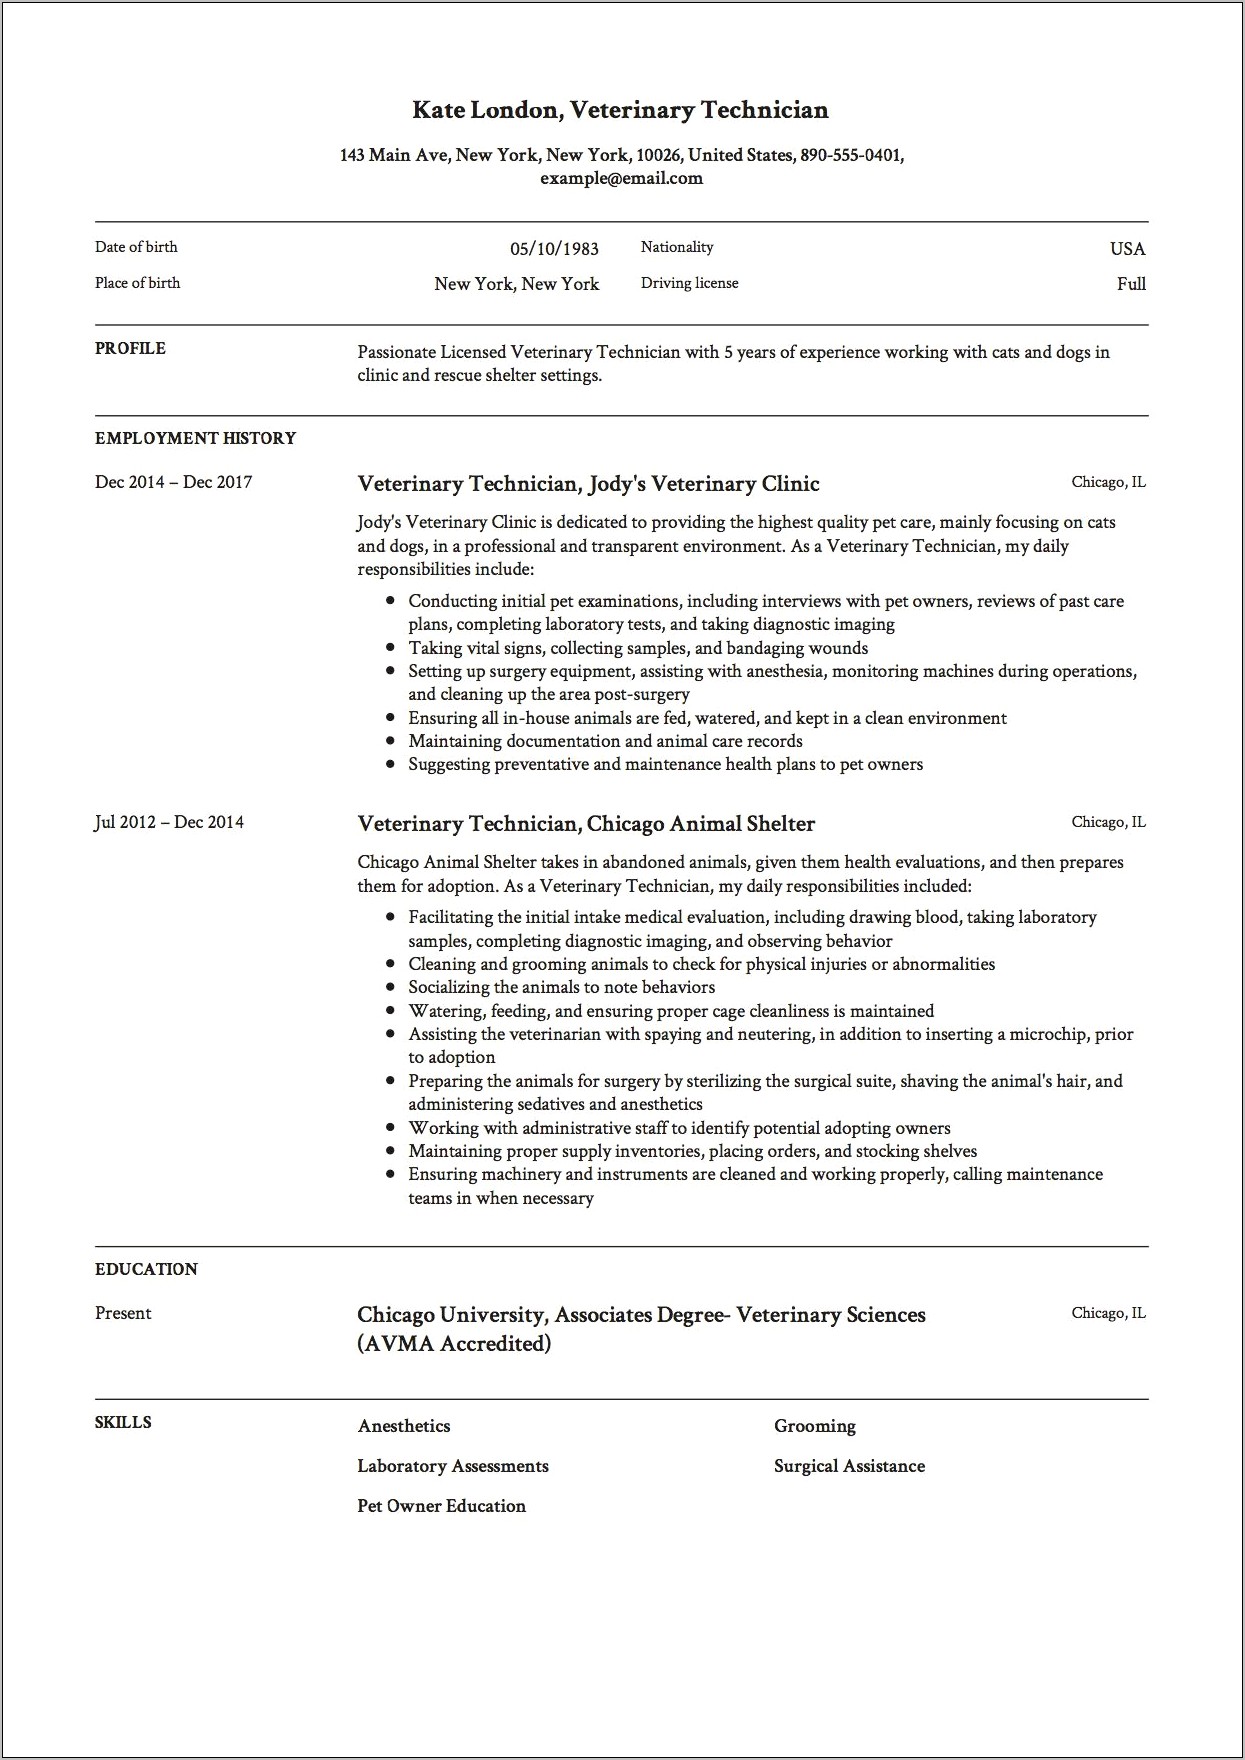 Resume Object Of In Animal Clinic